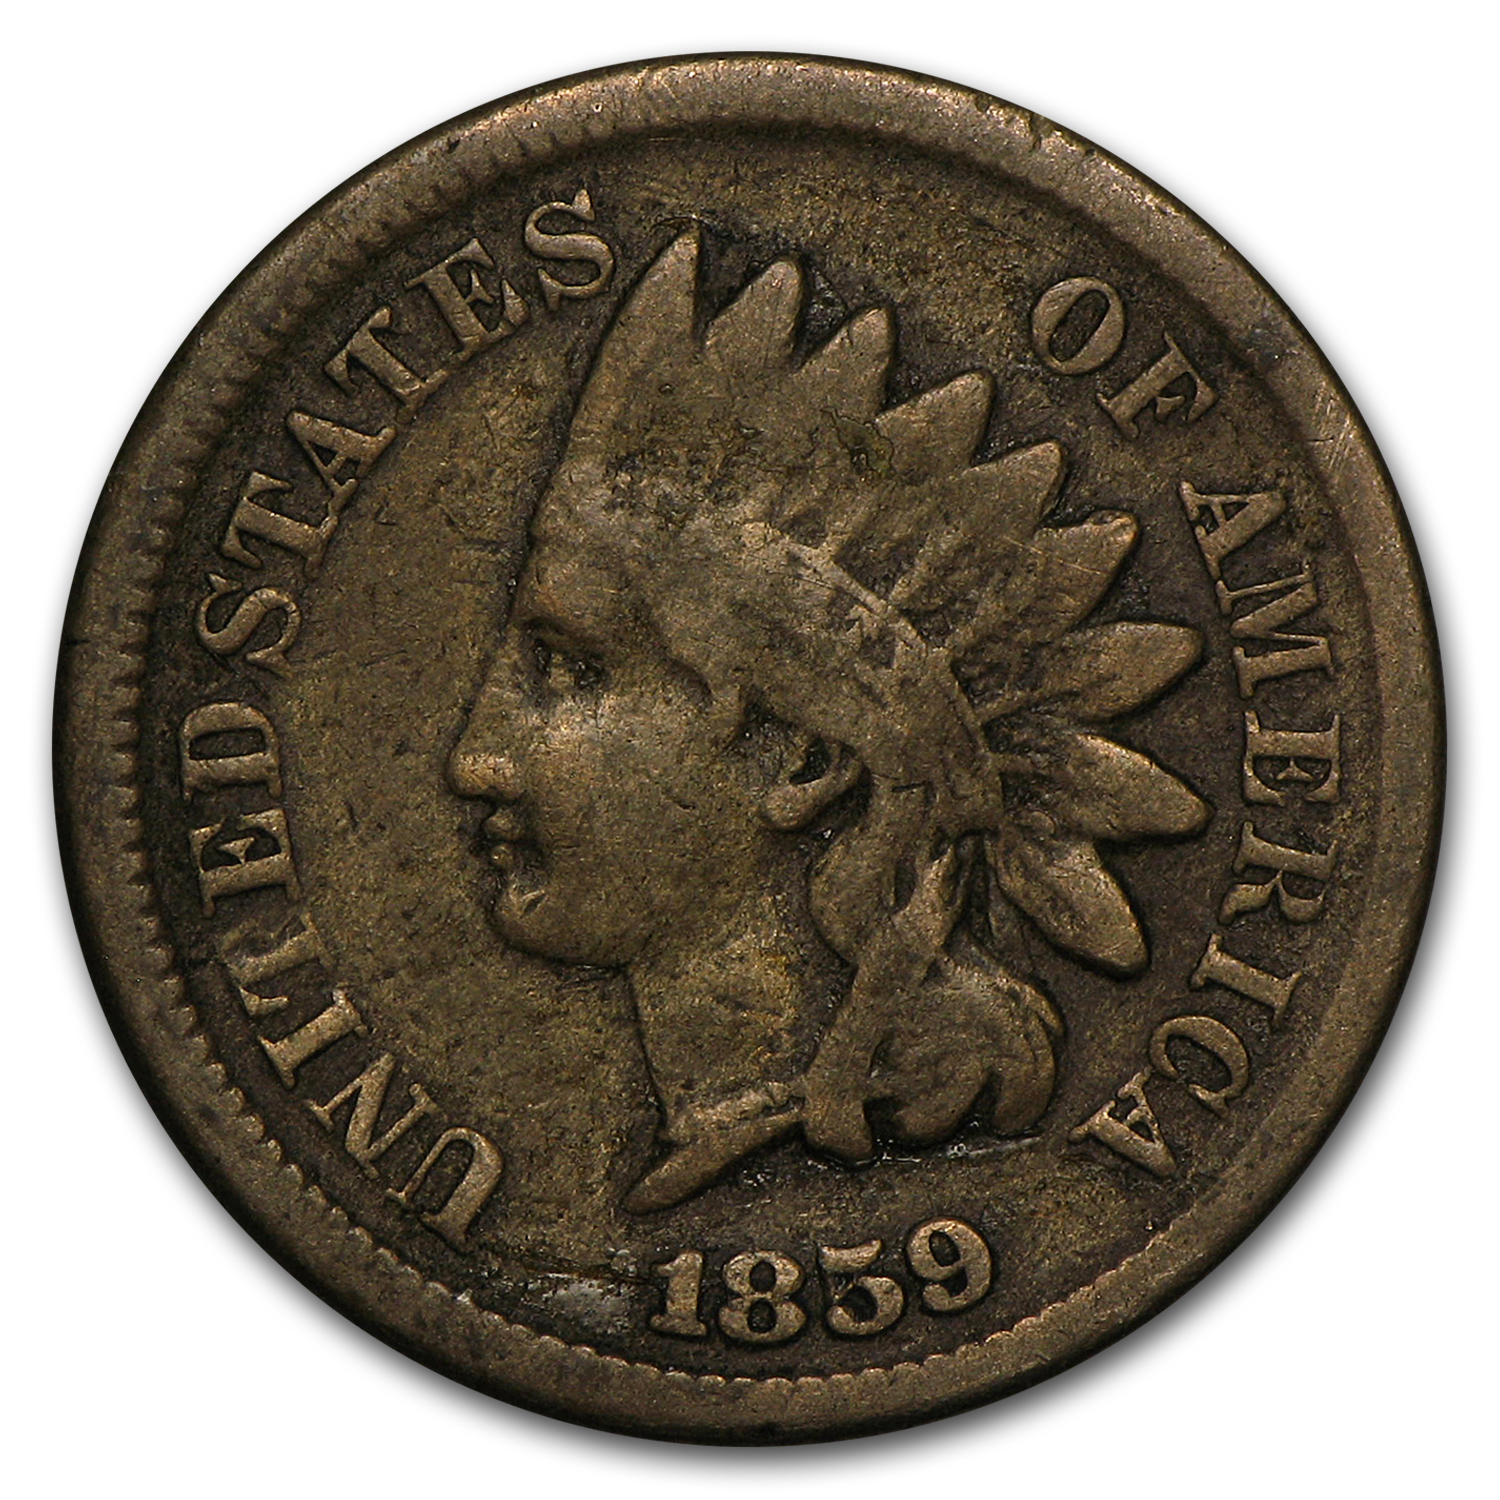 Buy 1859 Indian Head Cent VG